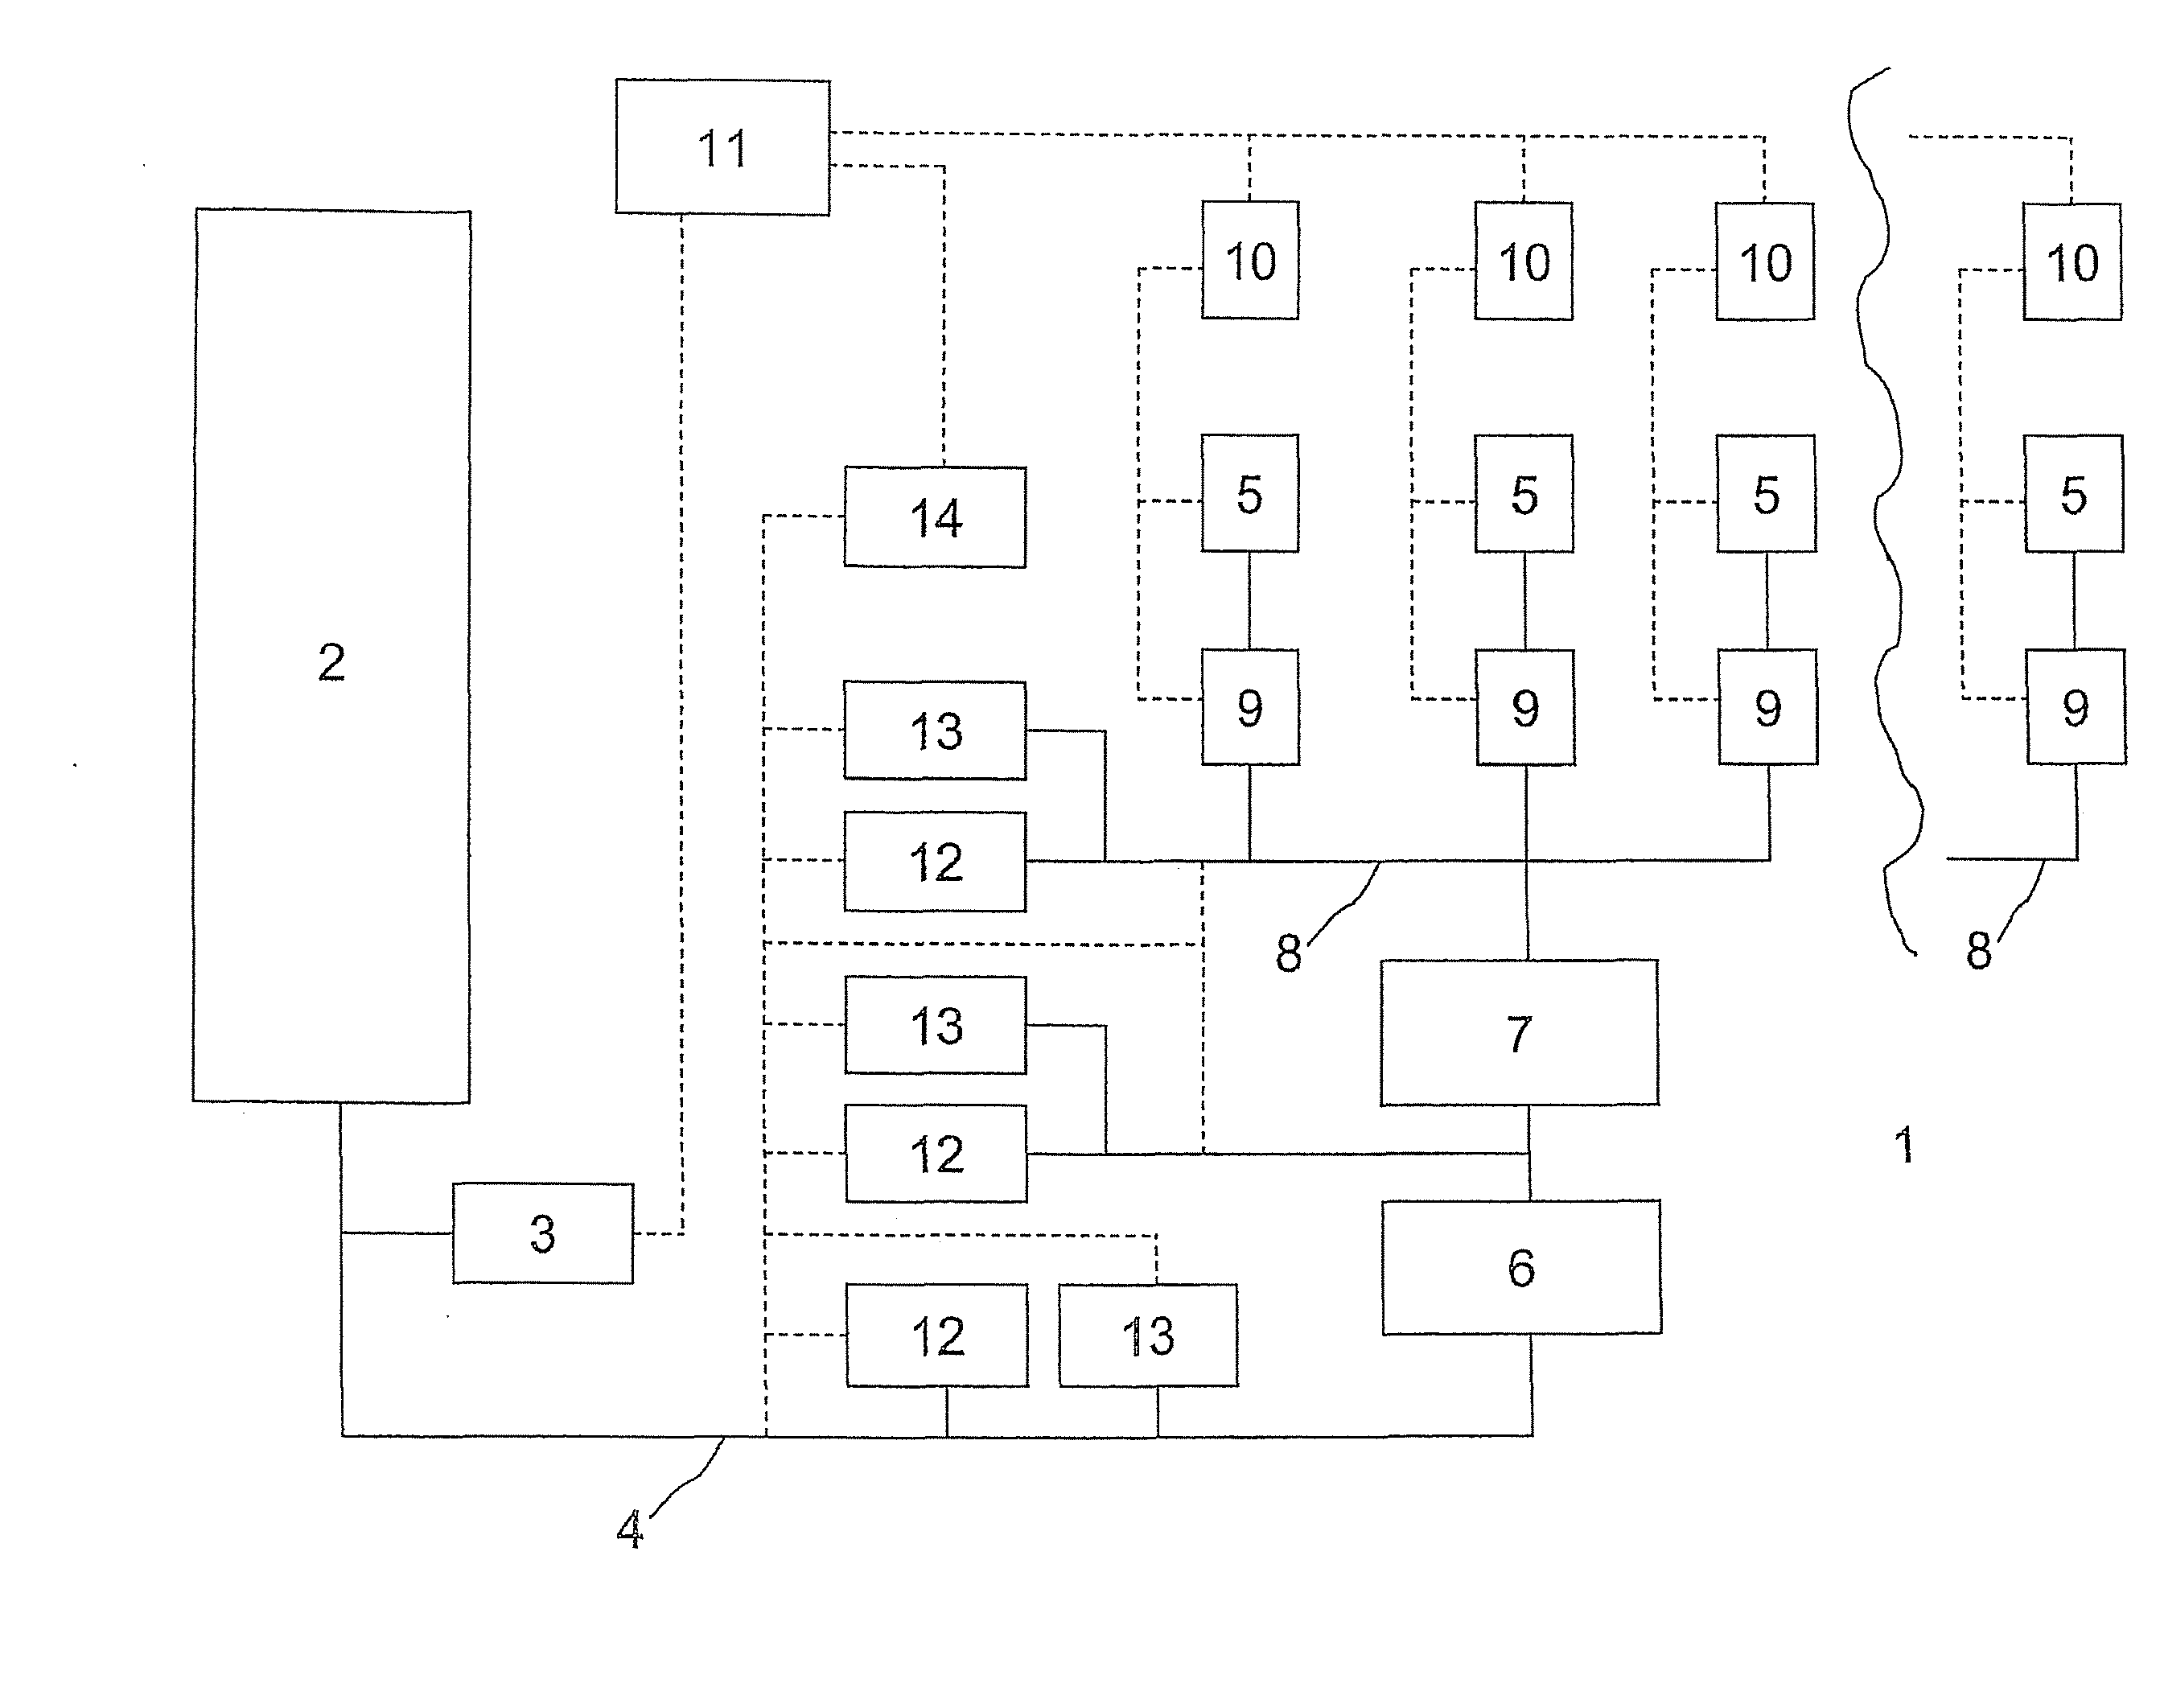 Power dispatch system for electrolytic production of hydrogen from wind power